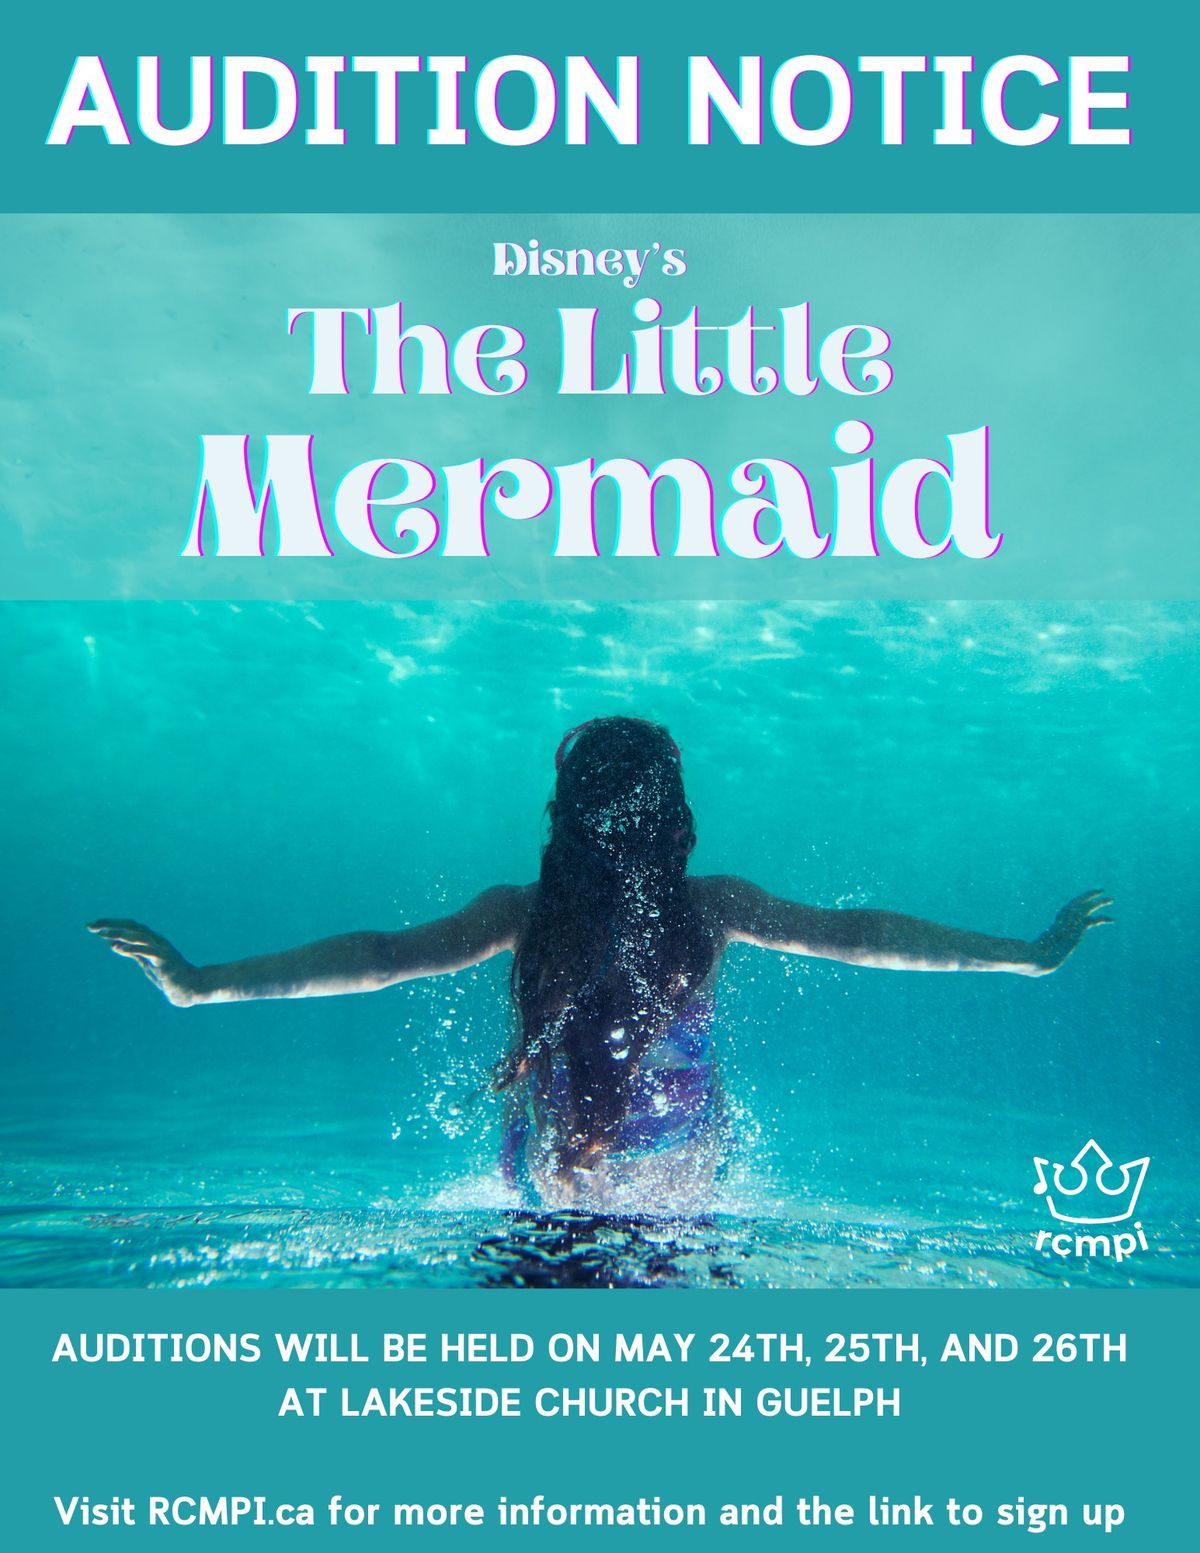 Auditions for RCMPI's The Little Mermaid